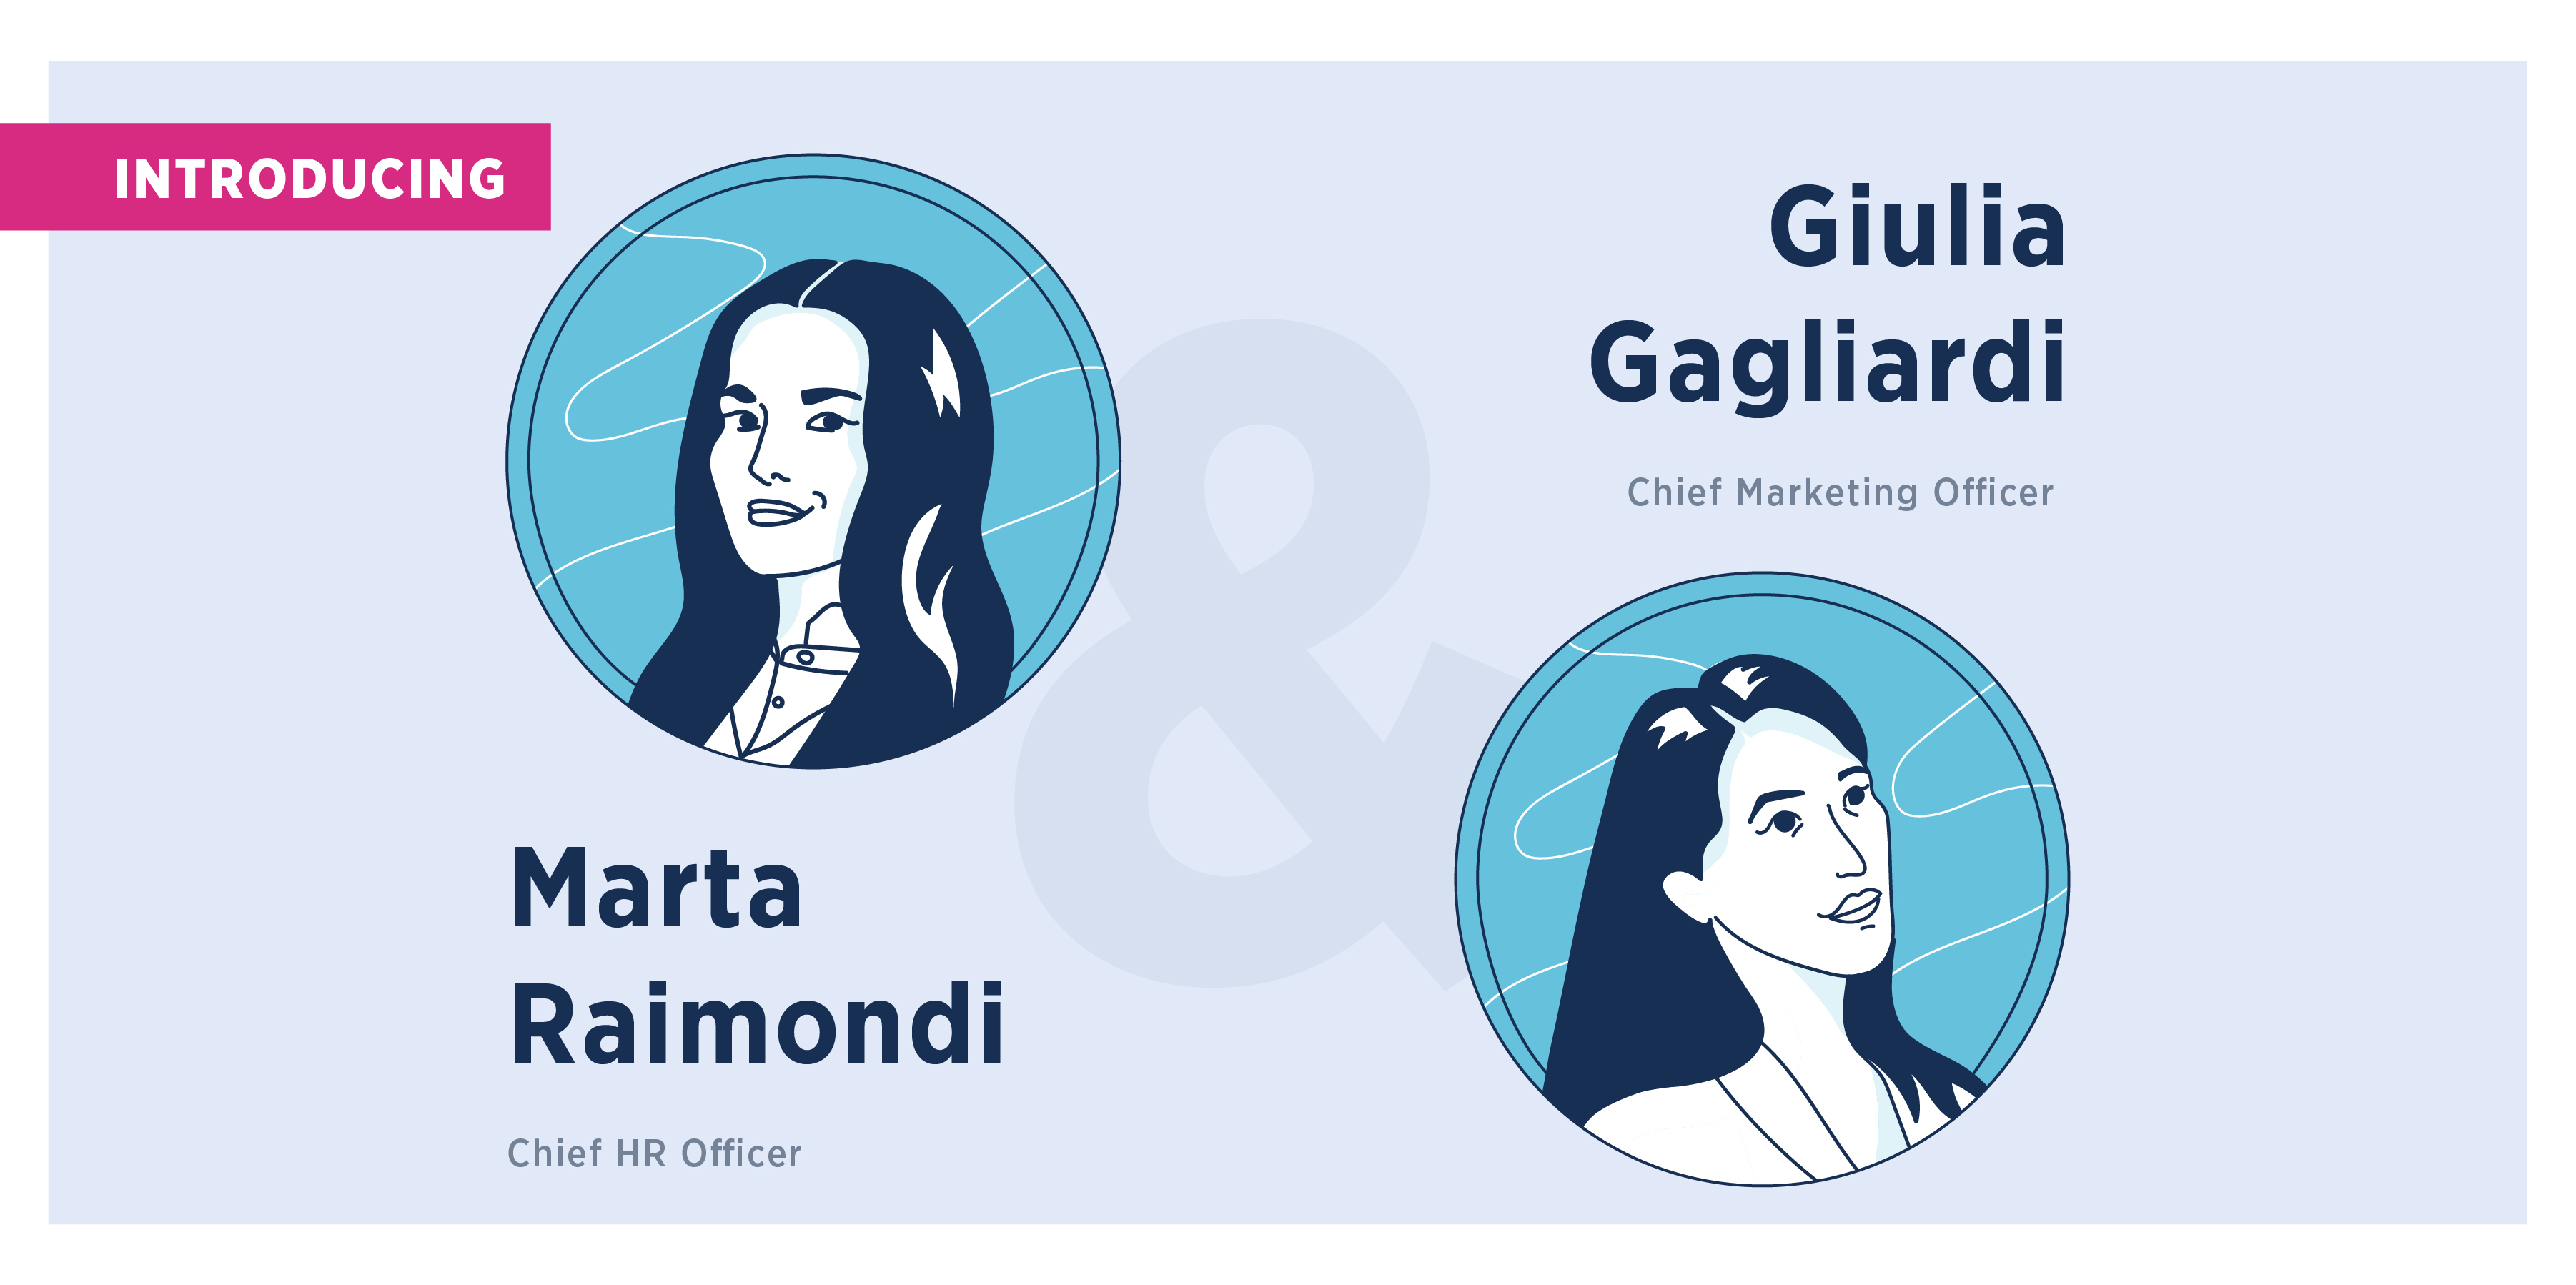 Welcome Giulia and Marta, our new CMO and CHRO!